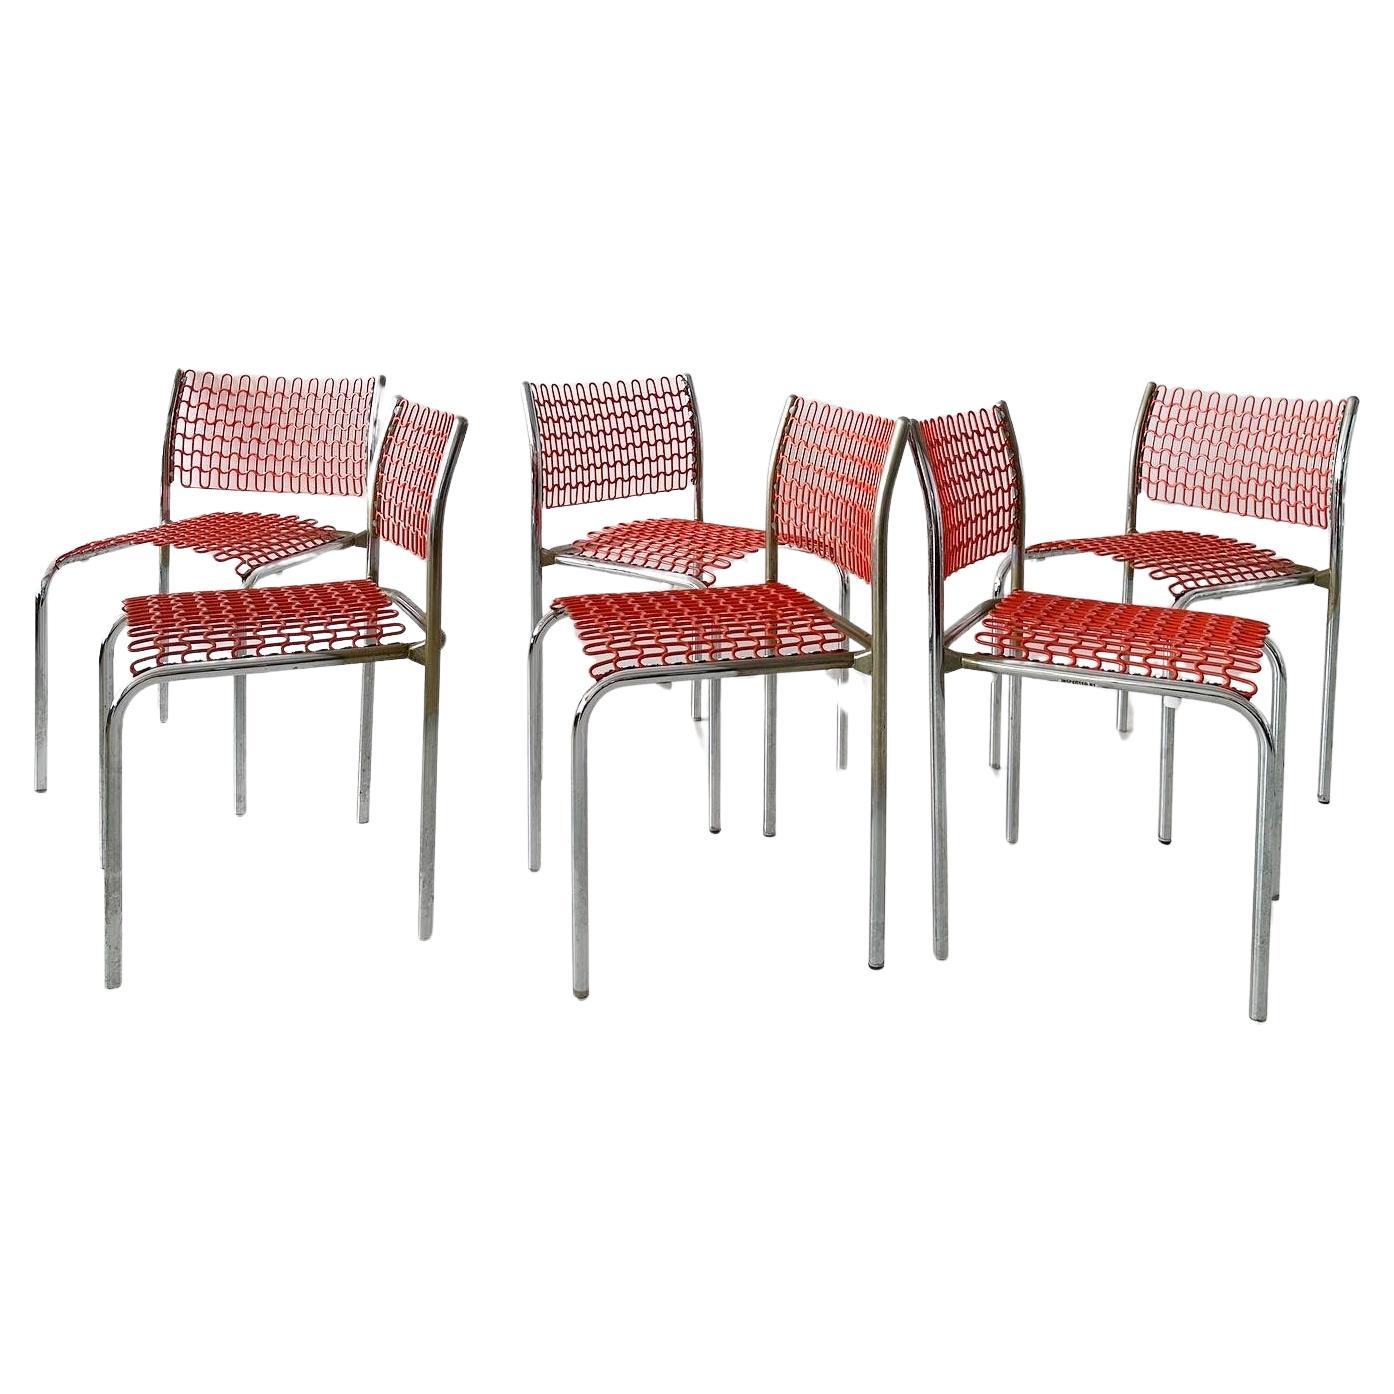 Orange Sof Tech Chairs by David Rowland for Thonet (set of 4)